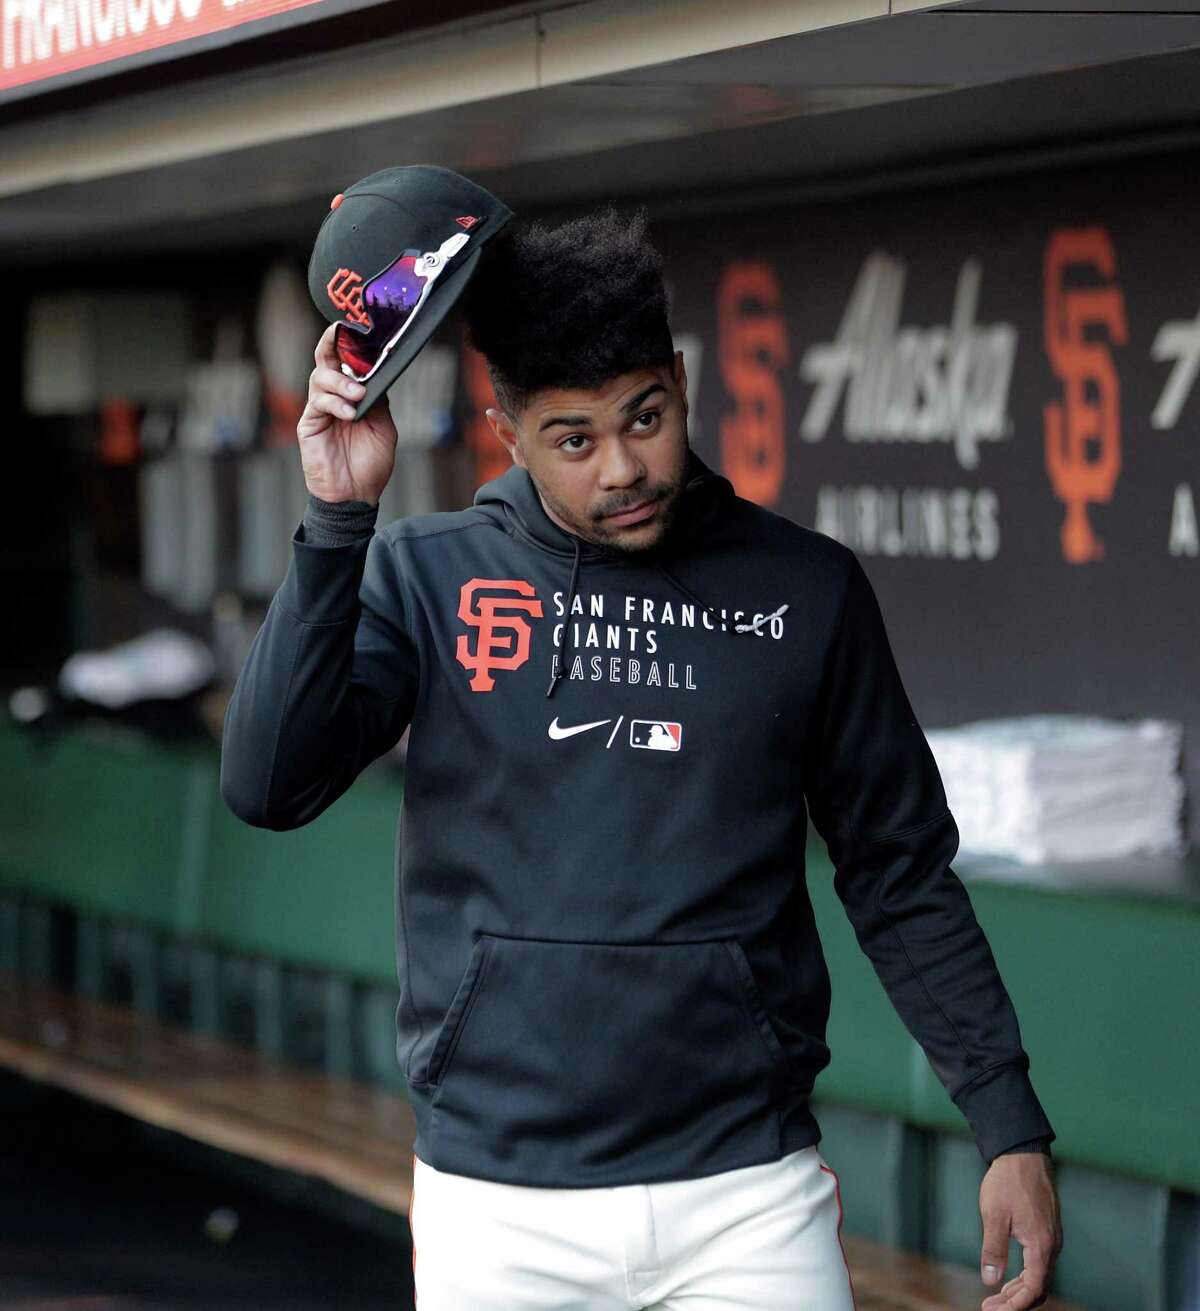 Giants vs. Dodgers: How the lineups, rotations, bullpens, benches